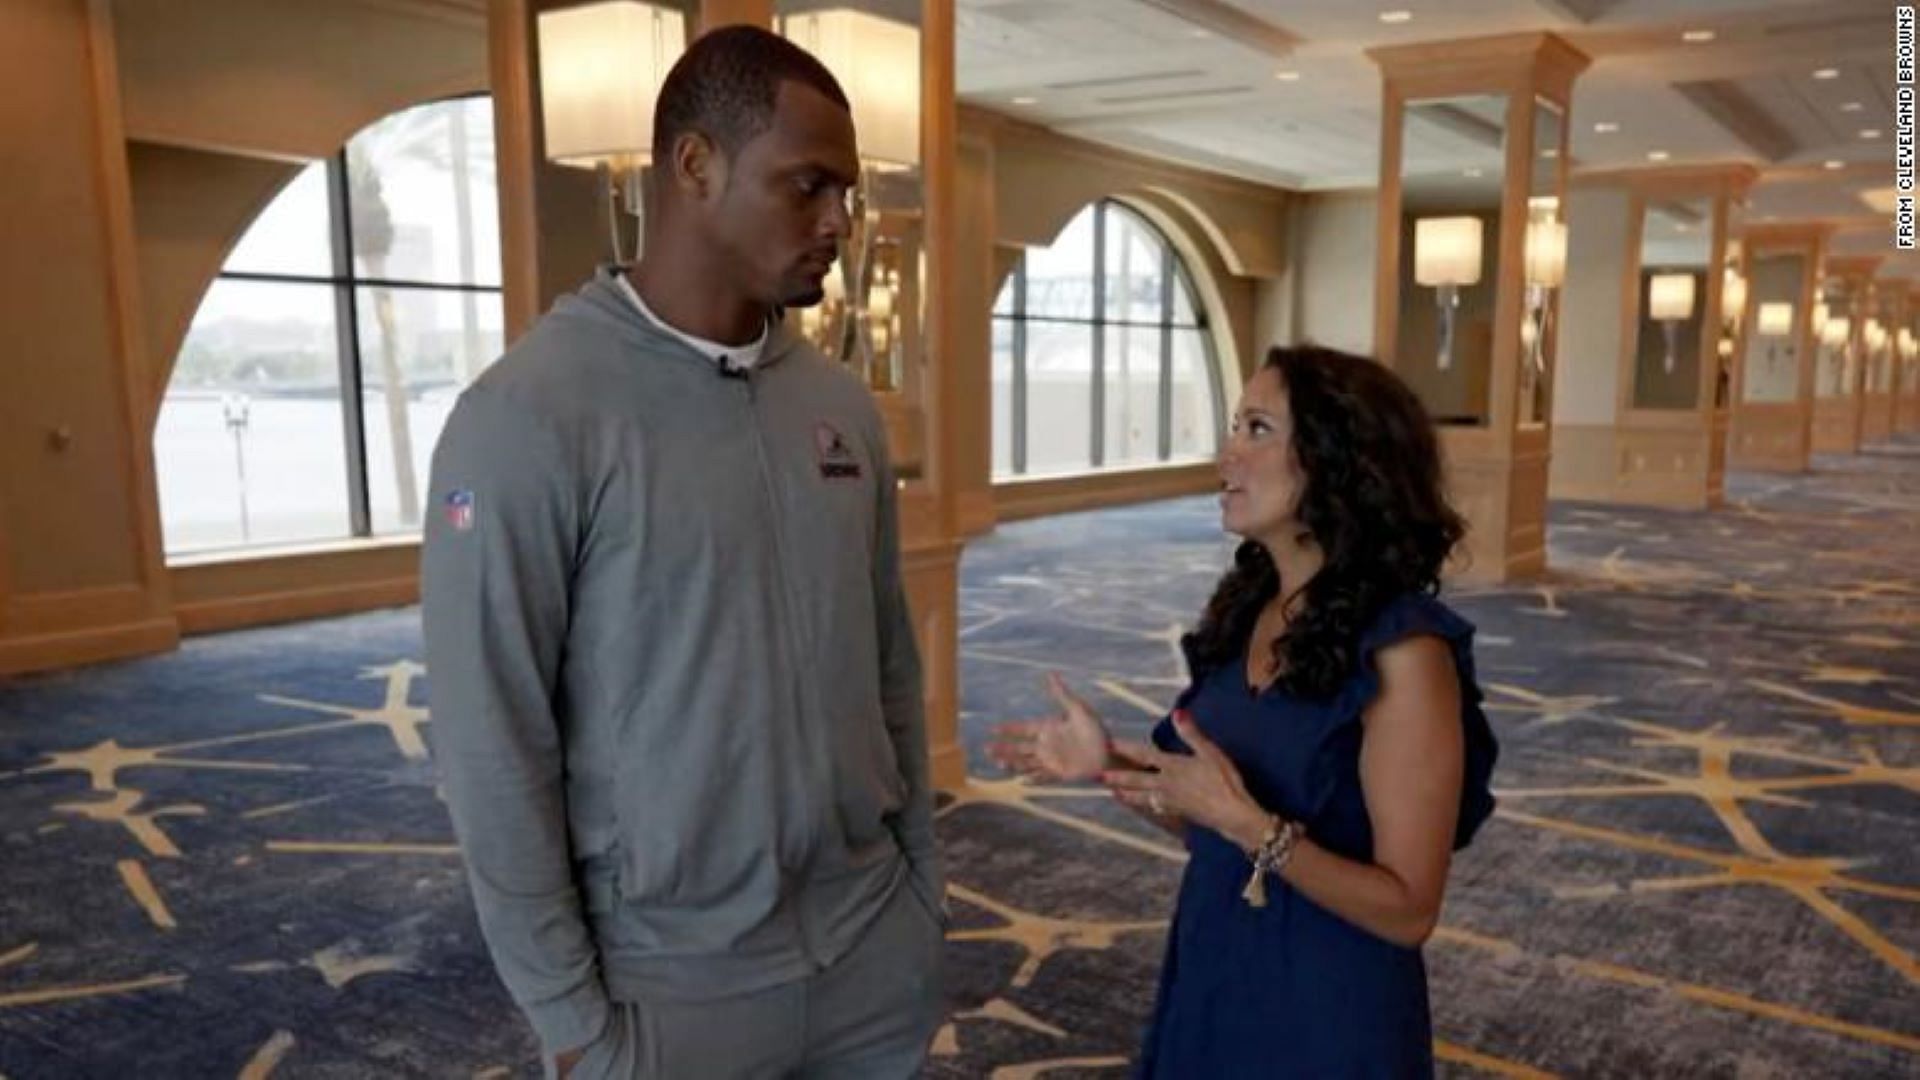 Deshaun Watson spoke to a reporter before playing his first game for the Cleveland Browns